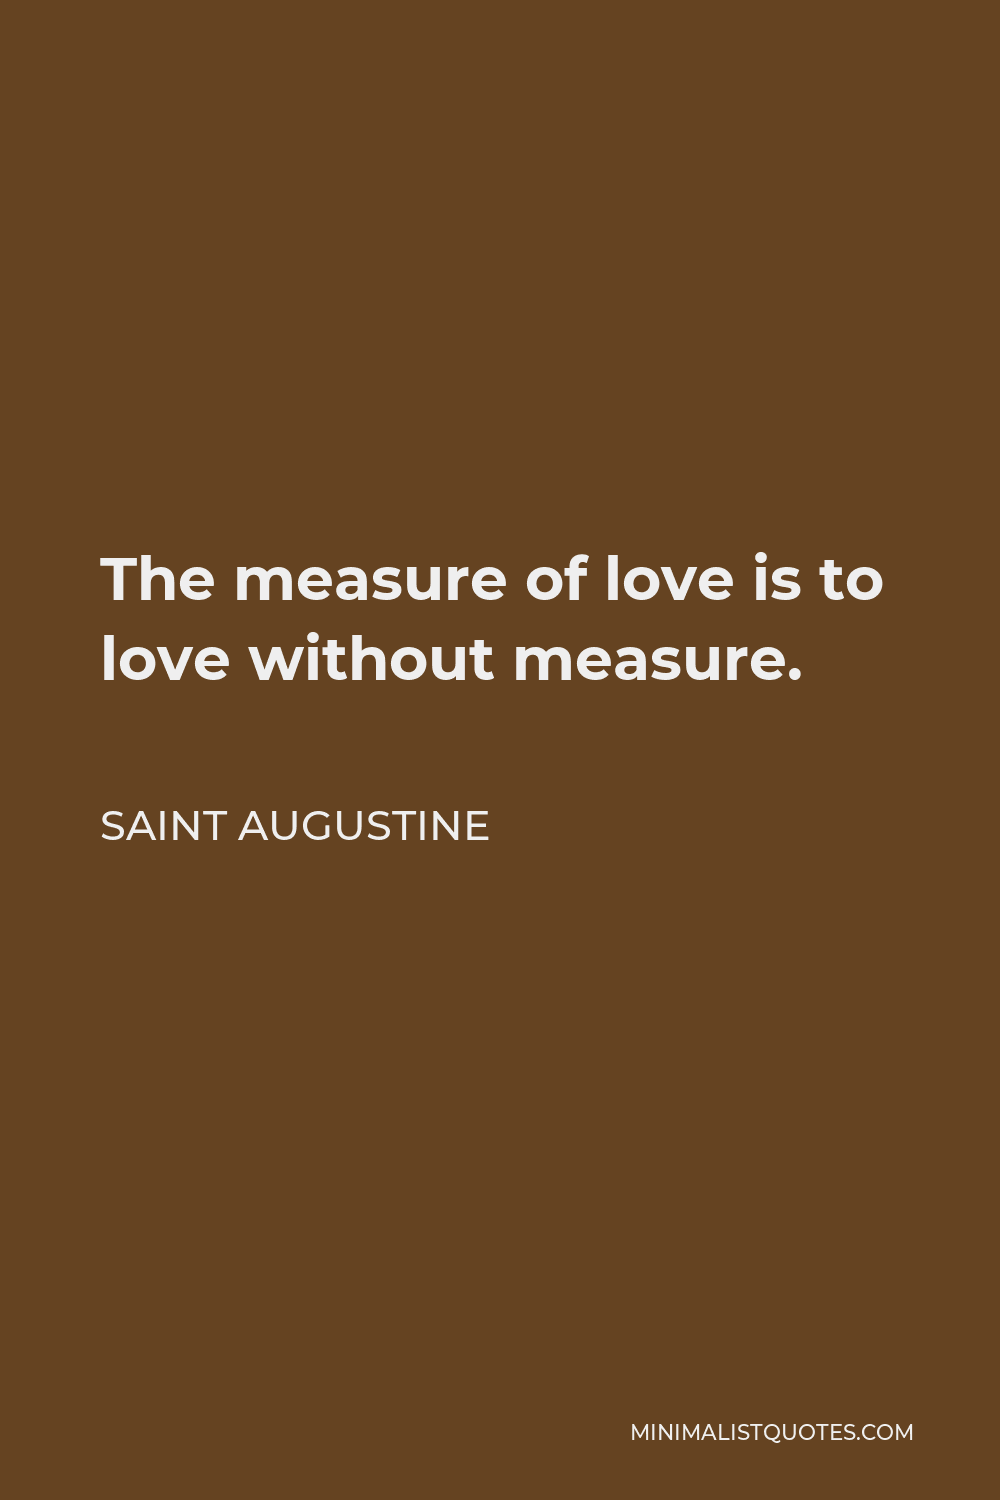 Saint Augustine Quote - The measure of love is to love without measure.